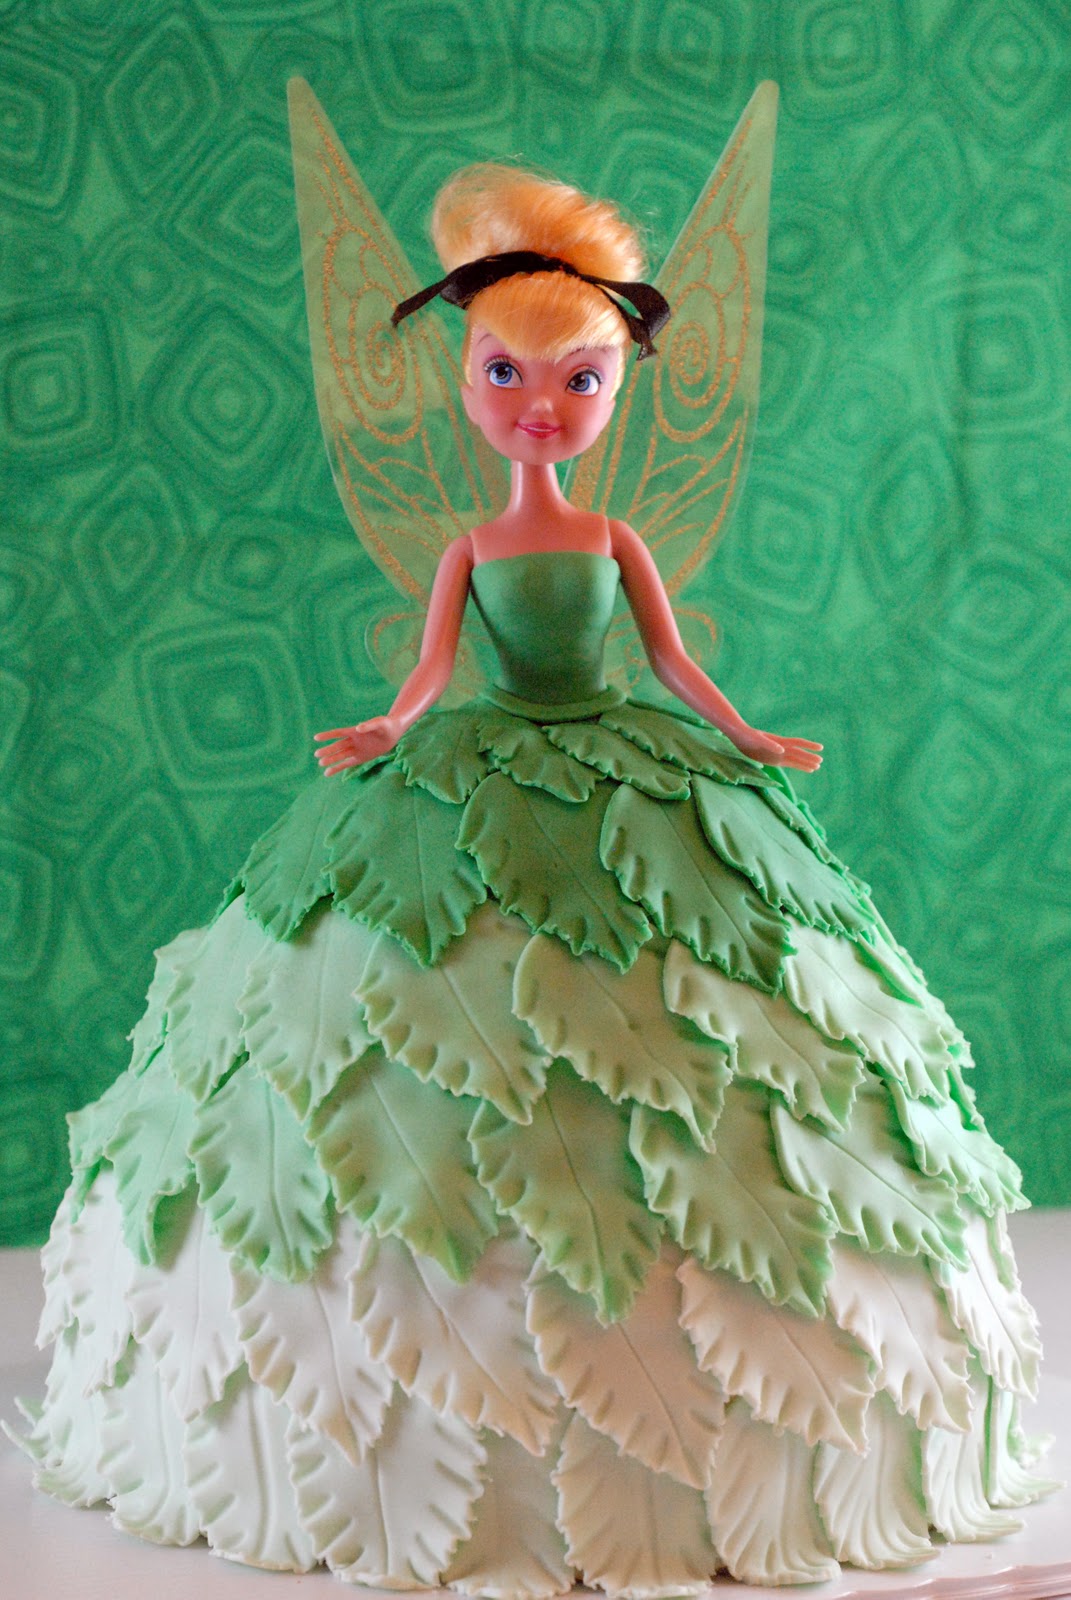 How To Make A Barbie Doll Cake With A Bundt Pan